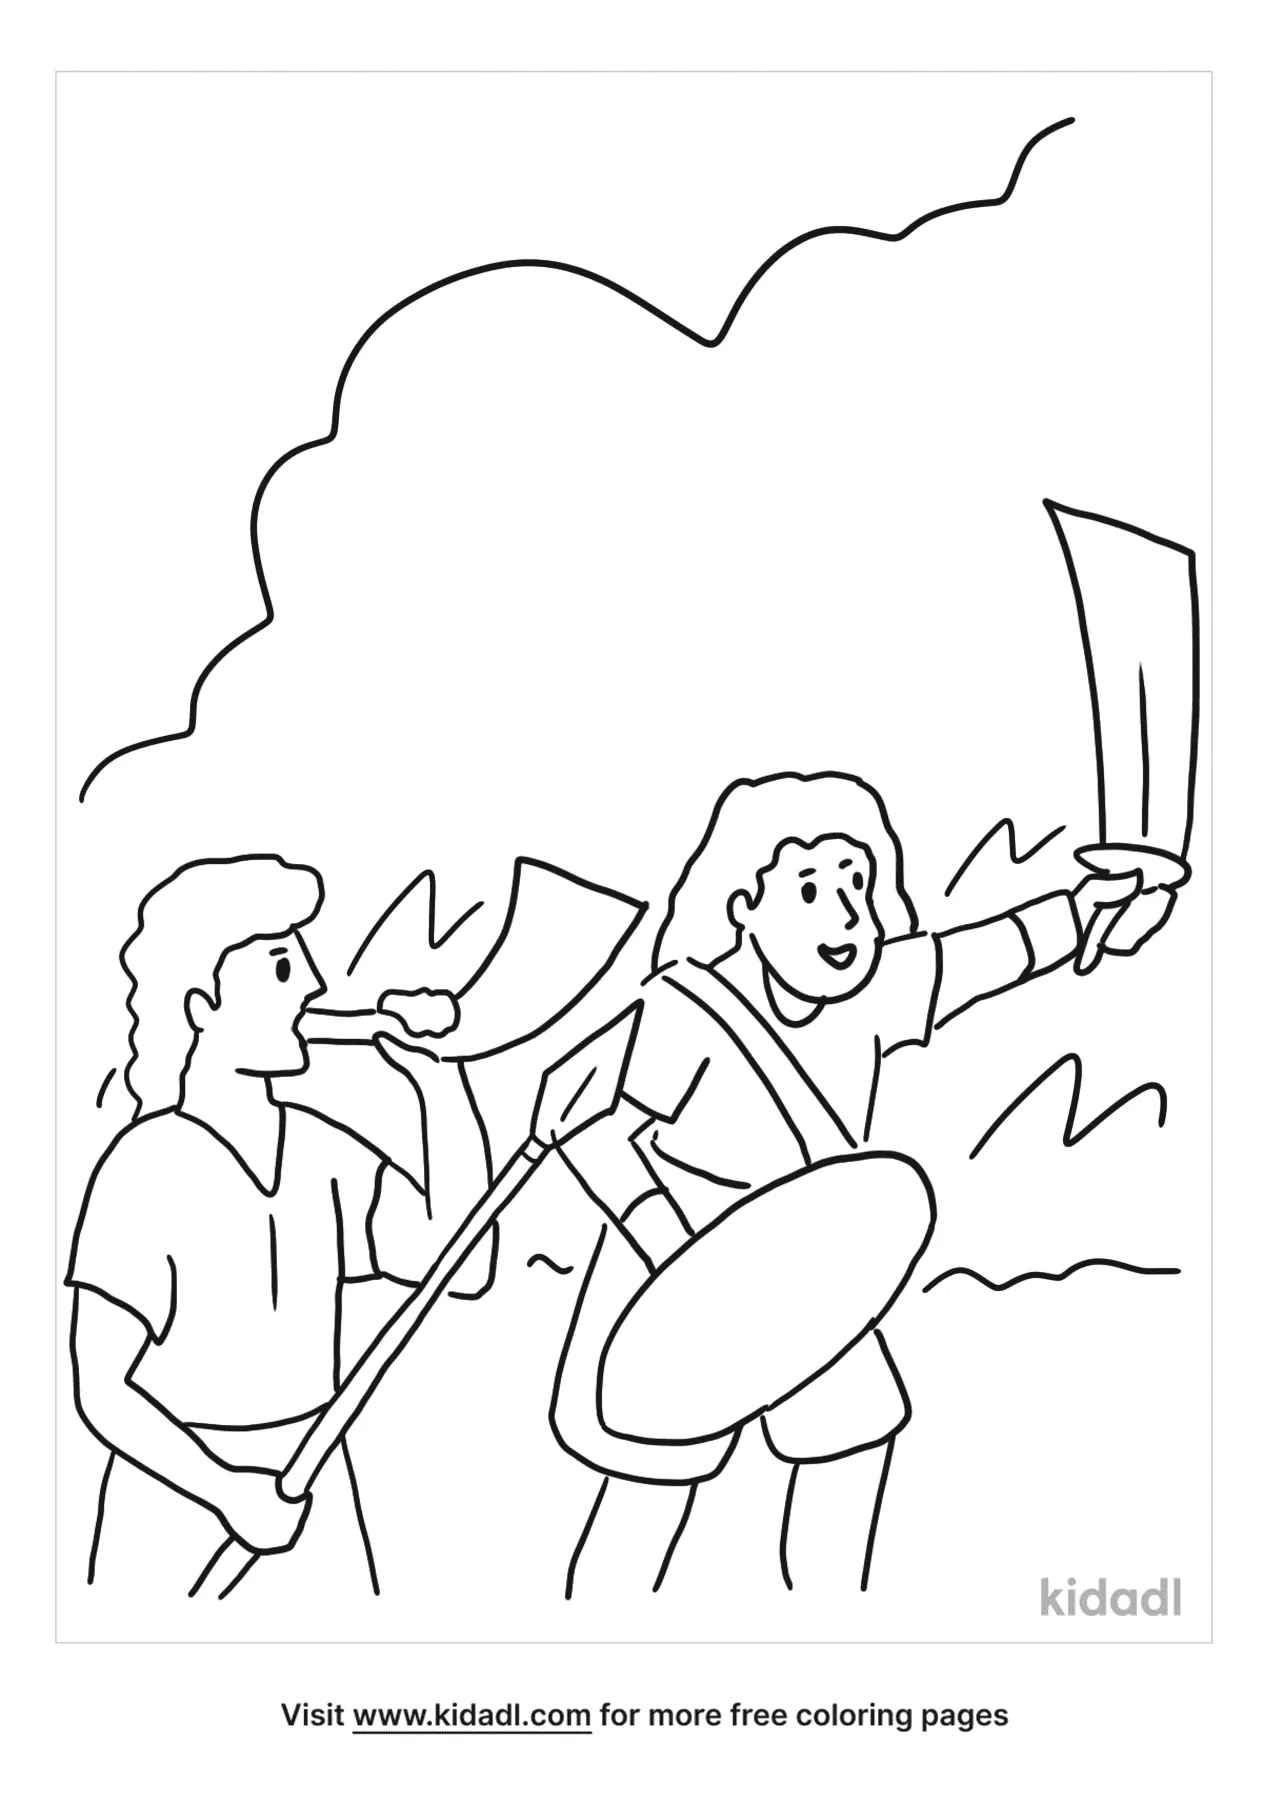 Free Joshua And Army Coloring Page | Coloring Page Printables | Kidadl